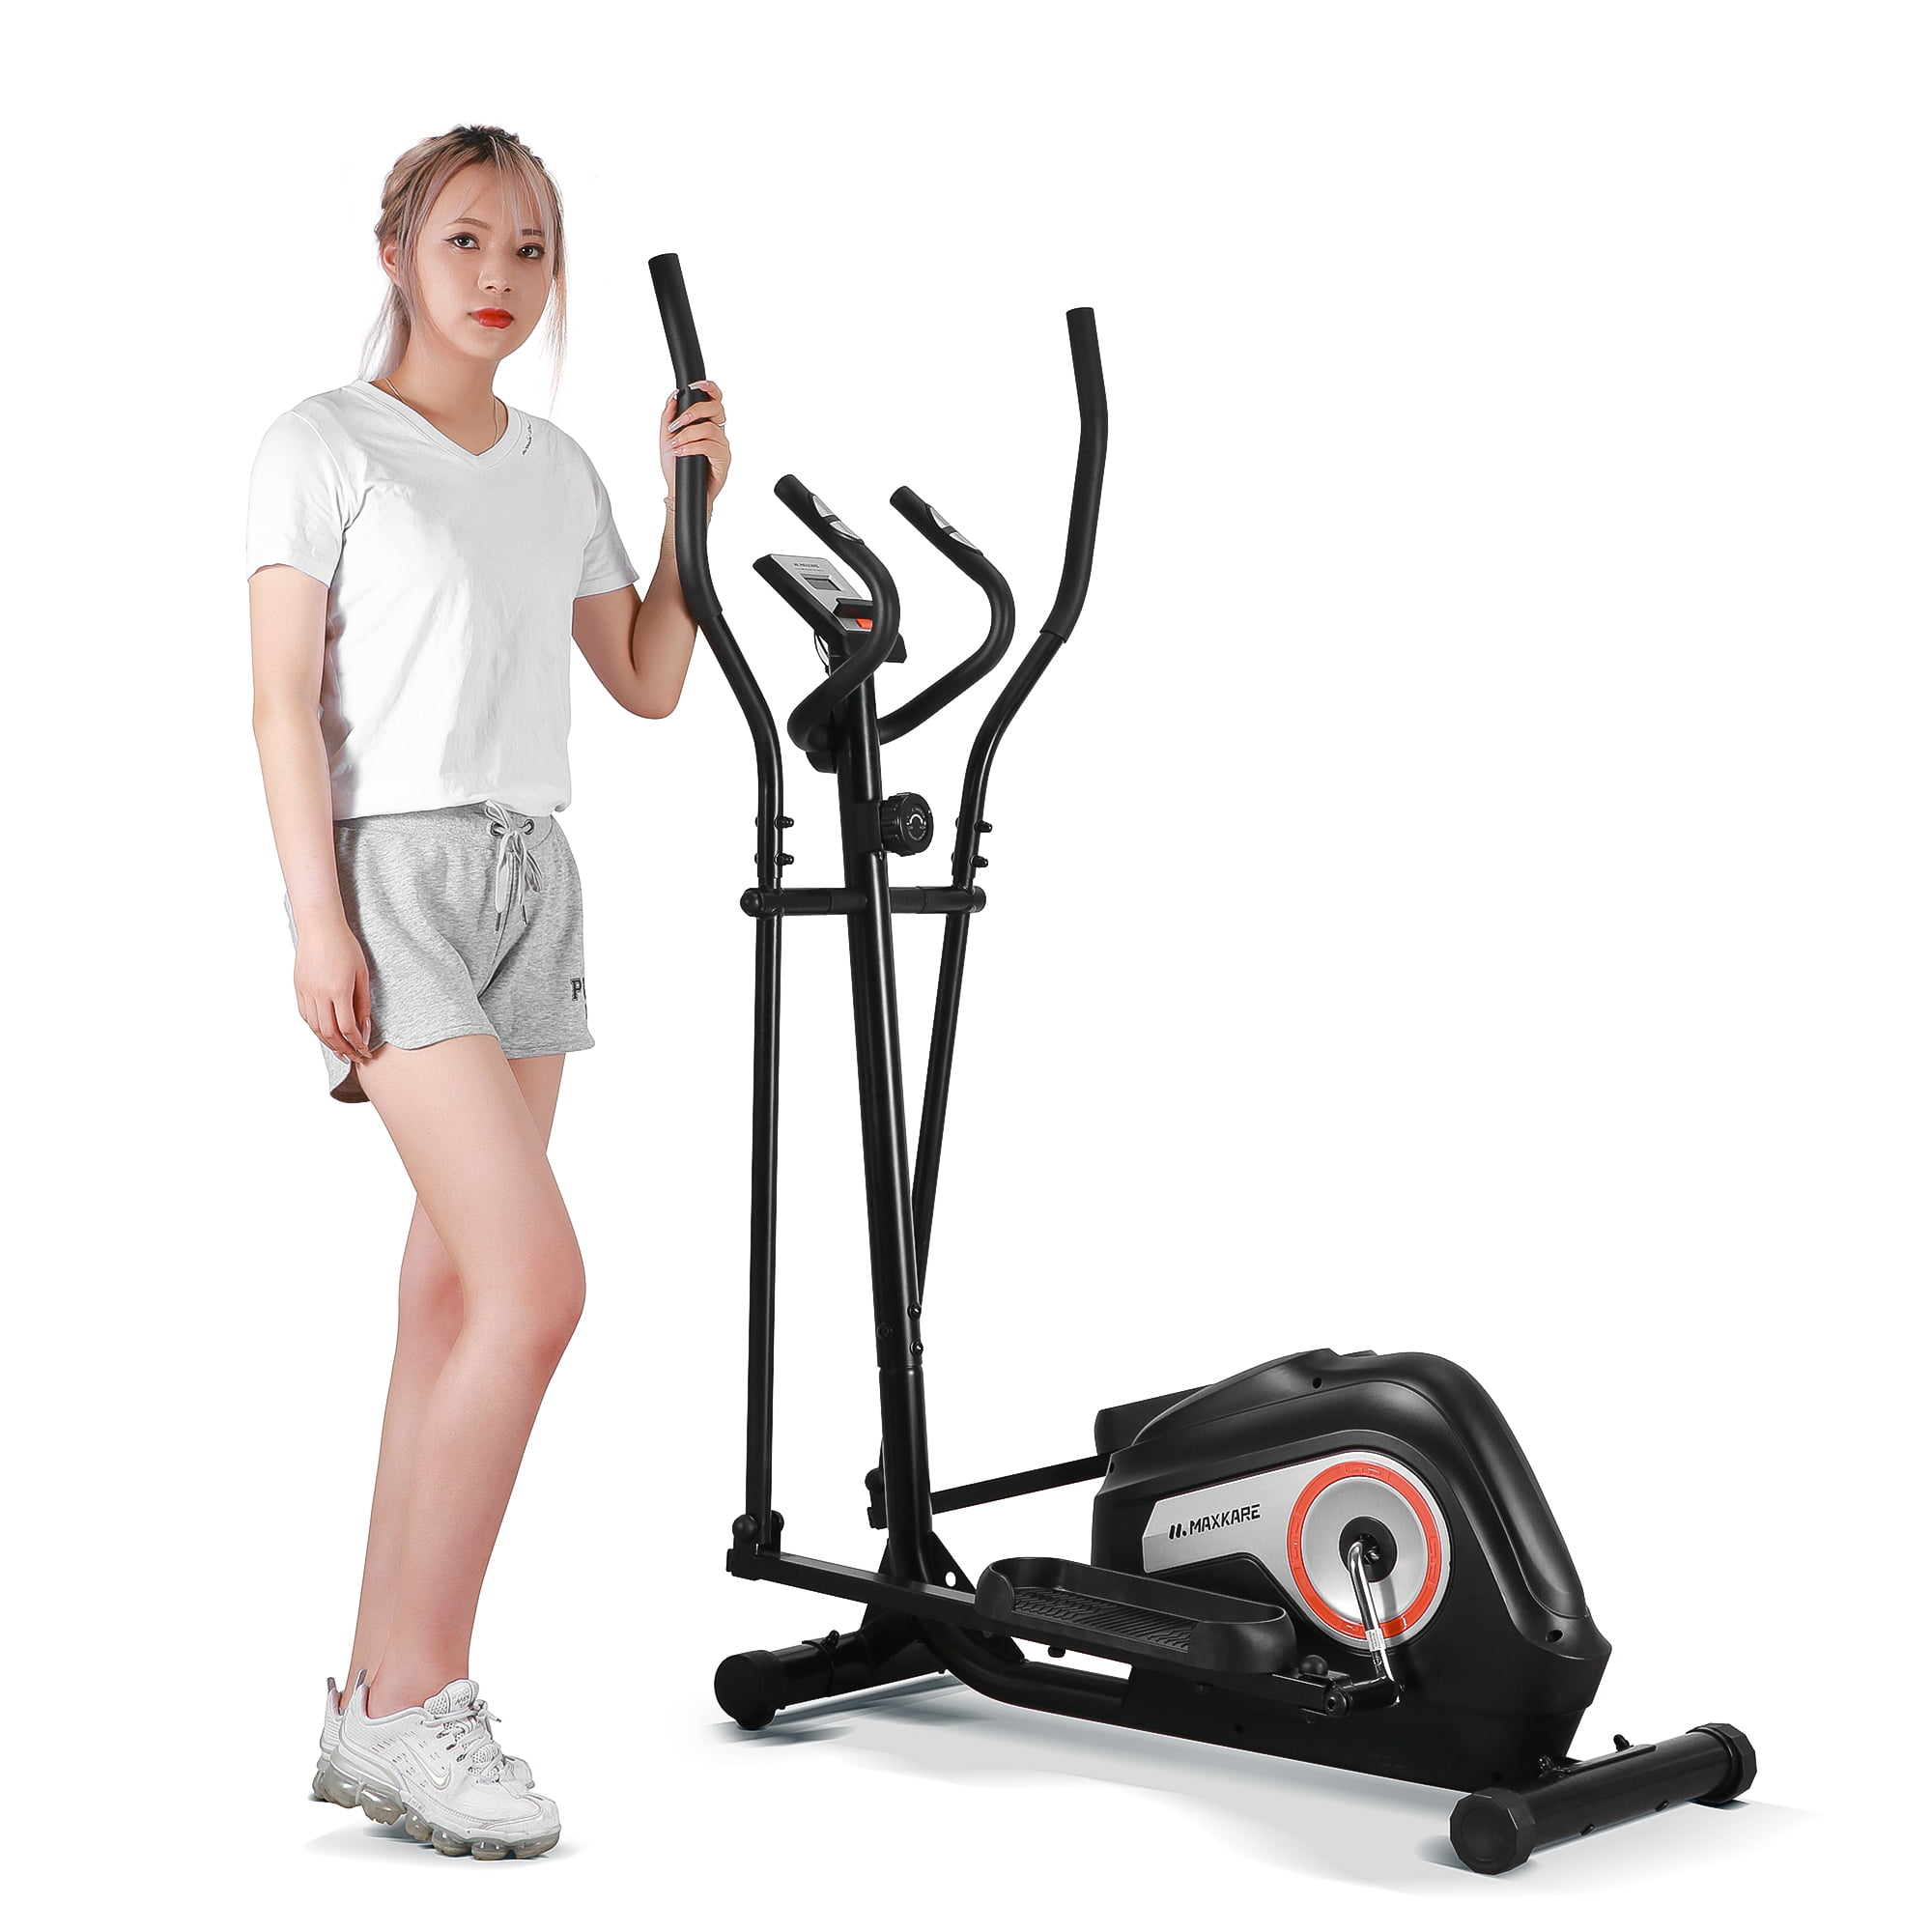 Details about   ANCHEER Magnetic Elliptical Machine Cross Trainer with 3D Virtual APP Control-US 